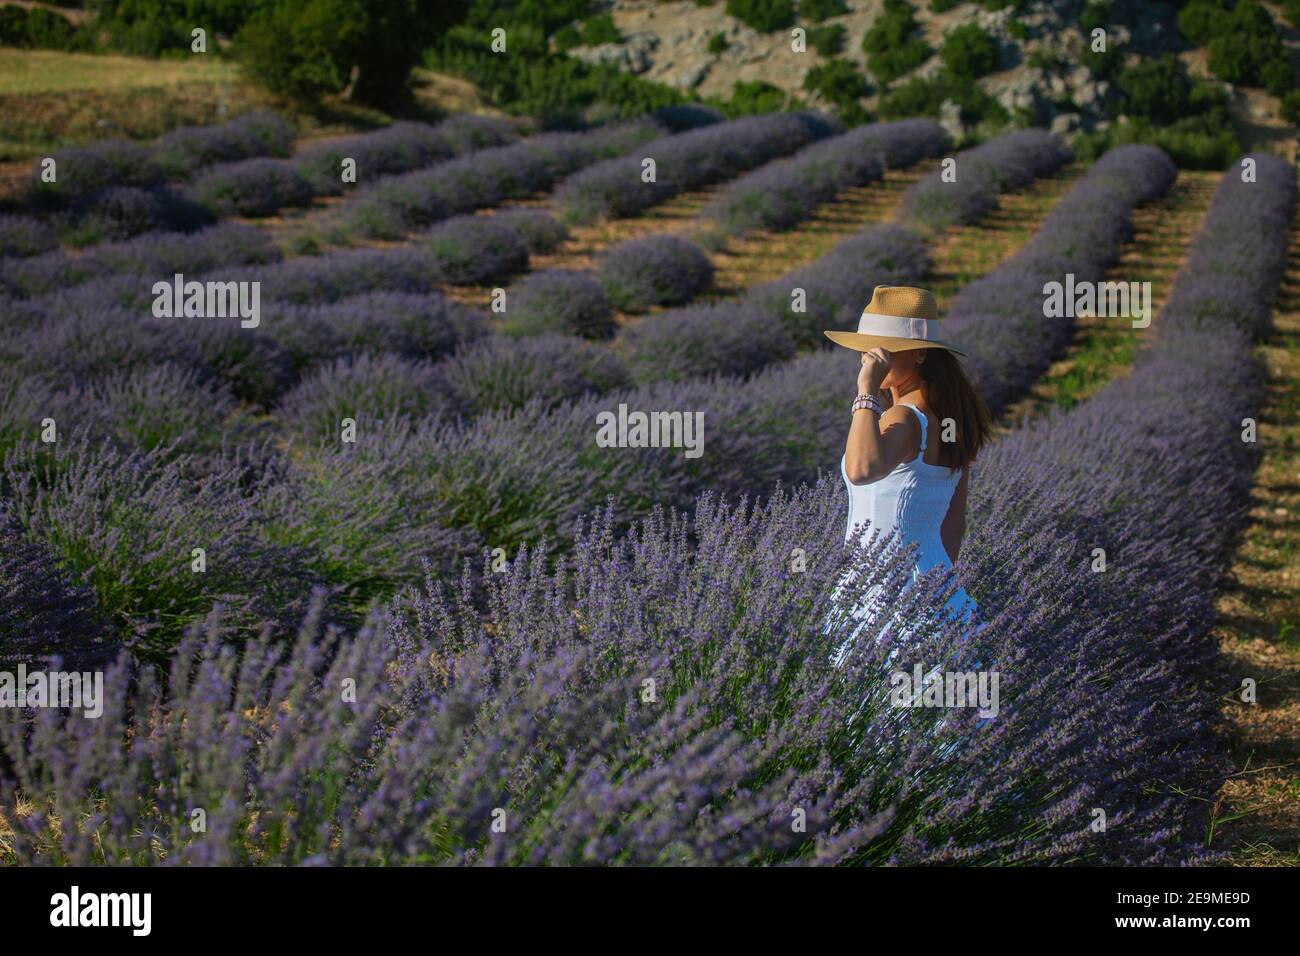 The woman in white dress standing in the middle of a lavender field in Turkey. Stock Photo